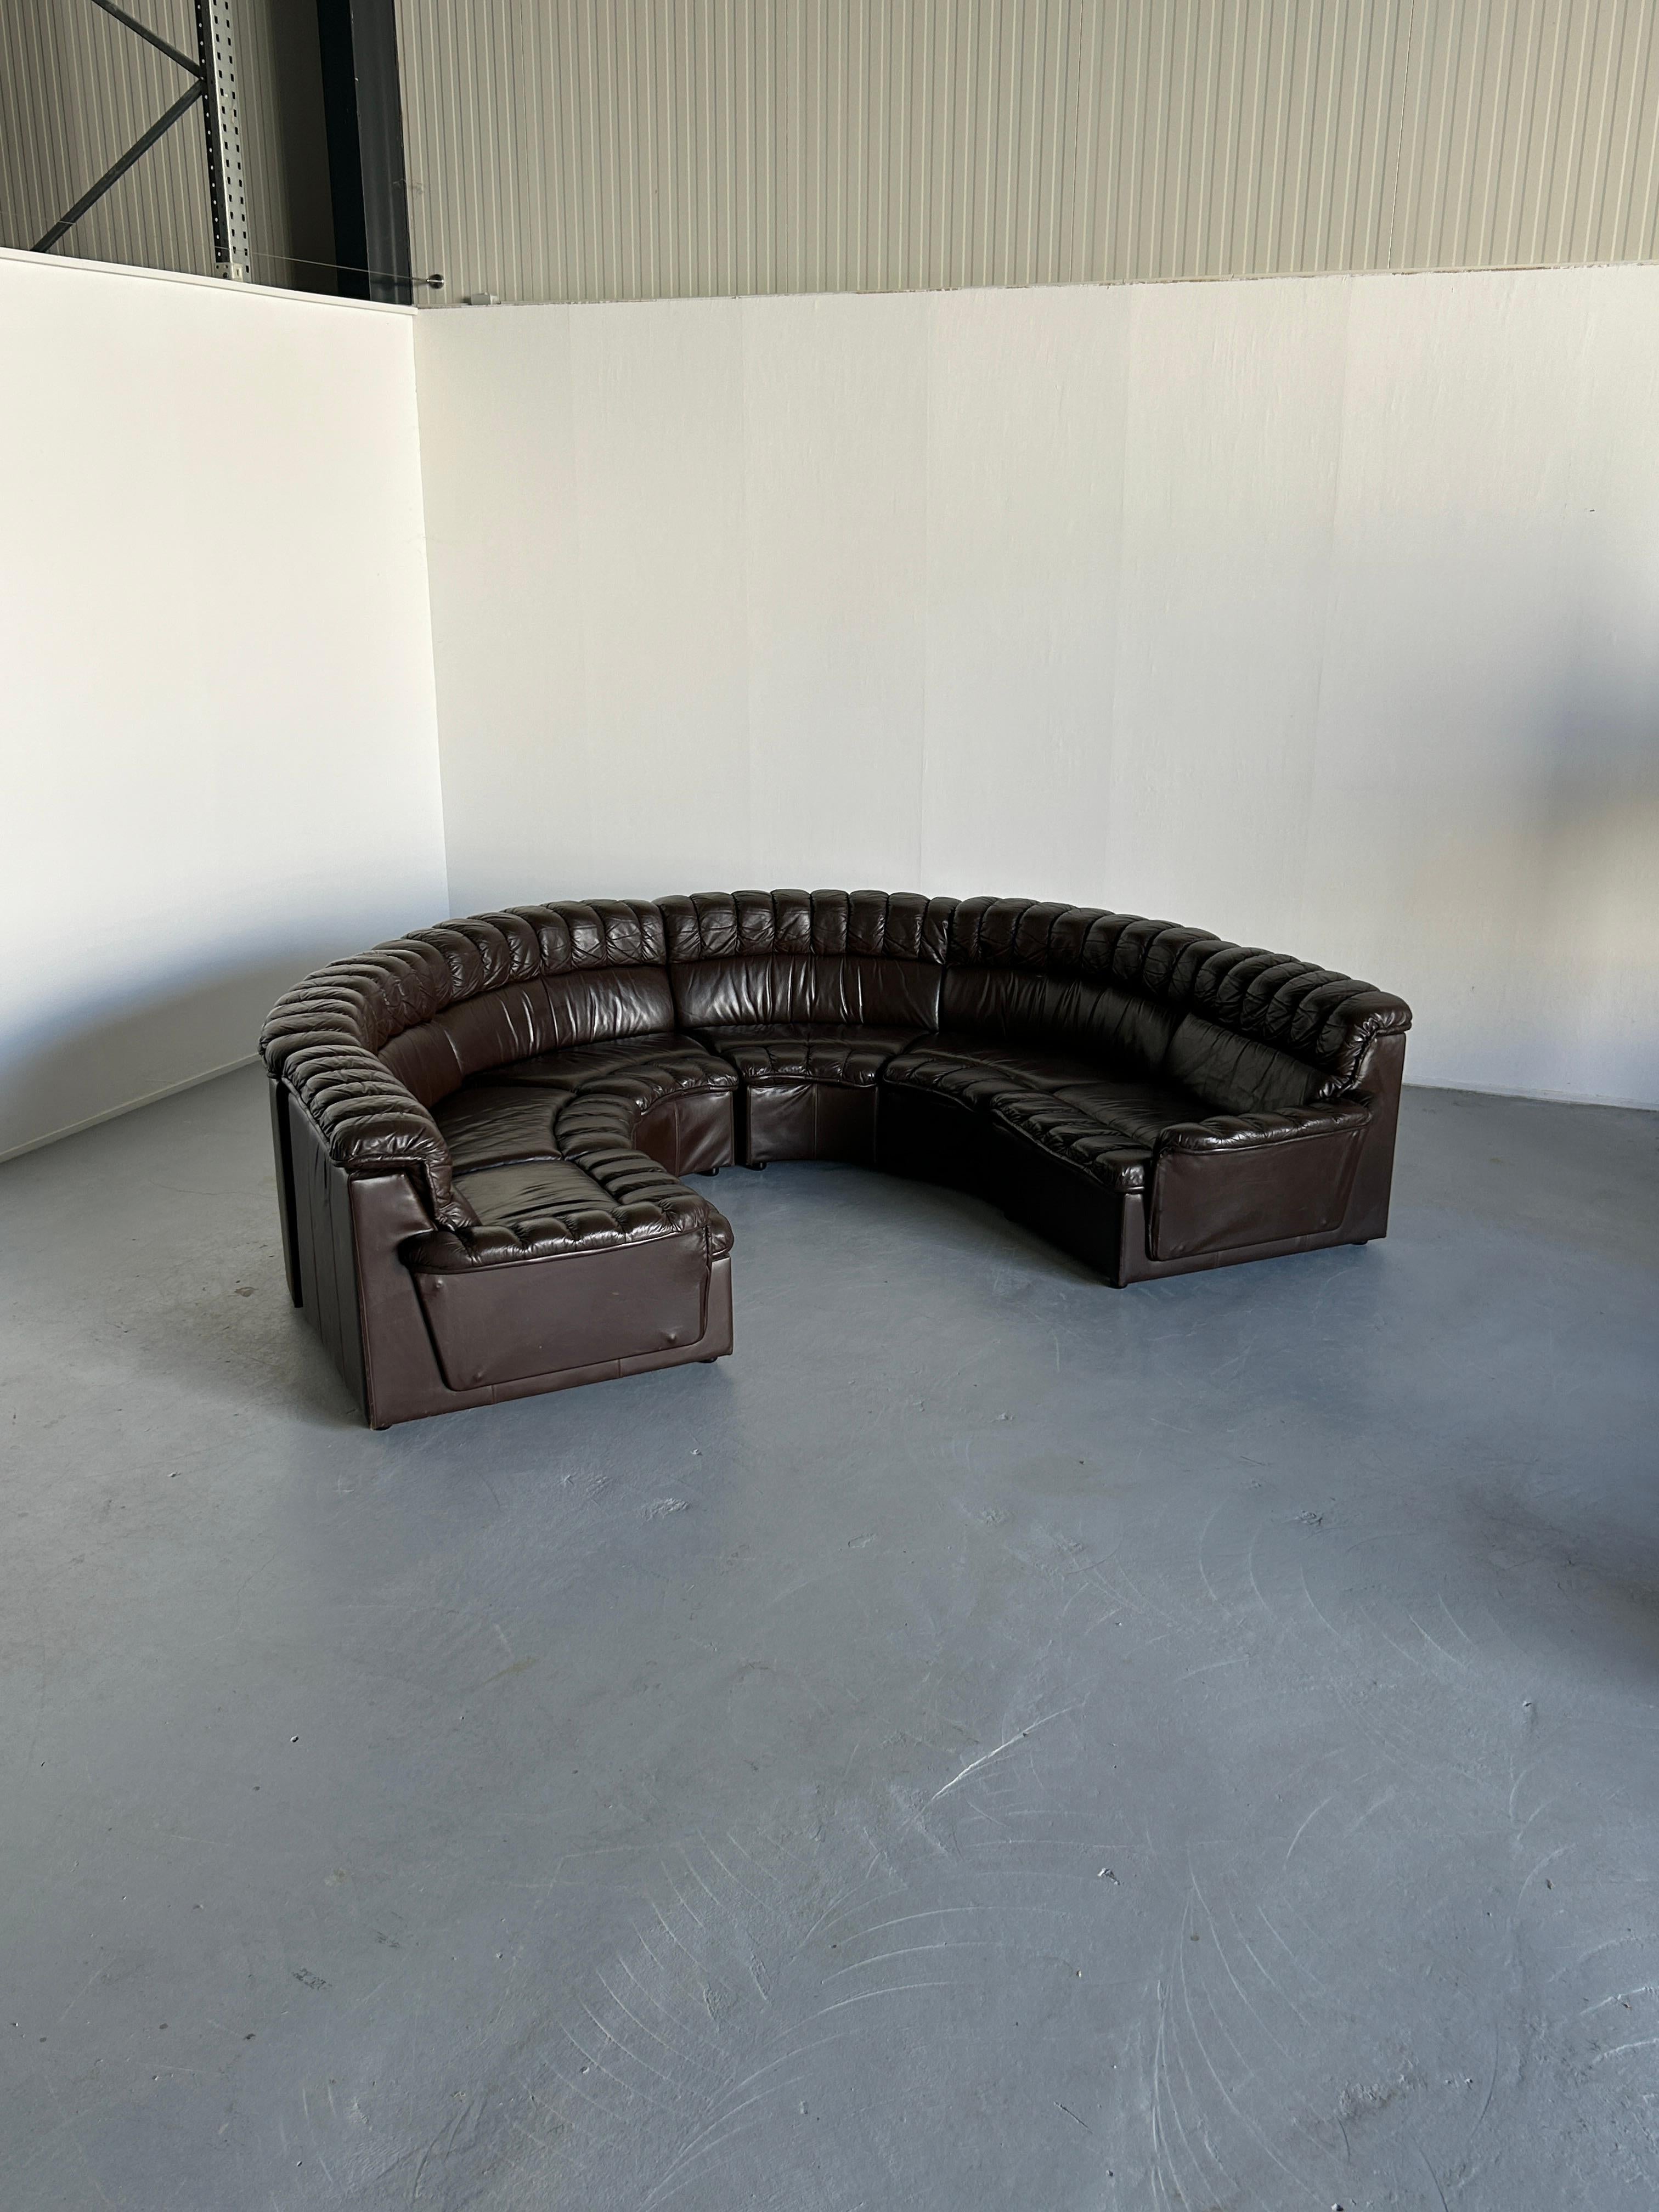 Mid-Century-Modern Leather Snake Sofa in style of De Sede DS-600 Non-Stop, 1970s In Good Condition For Sale In Zagreb, HR